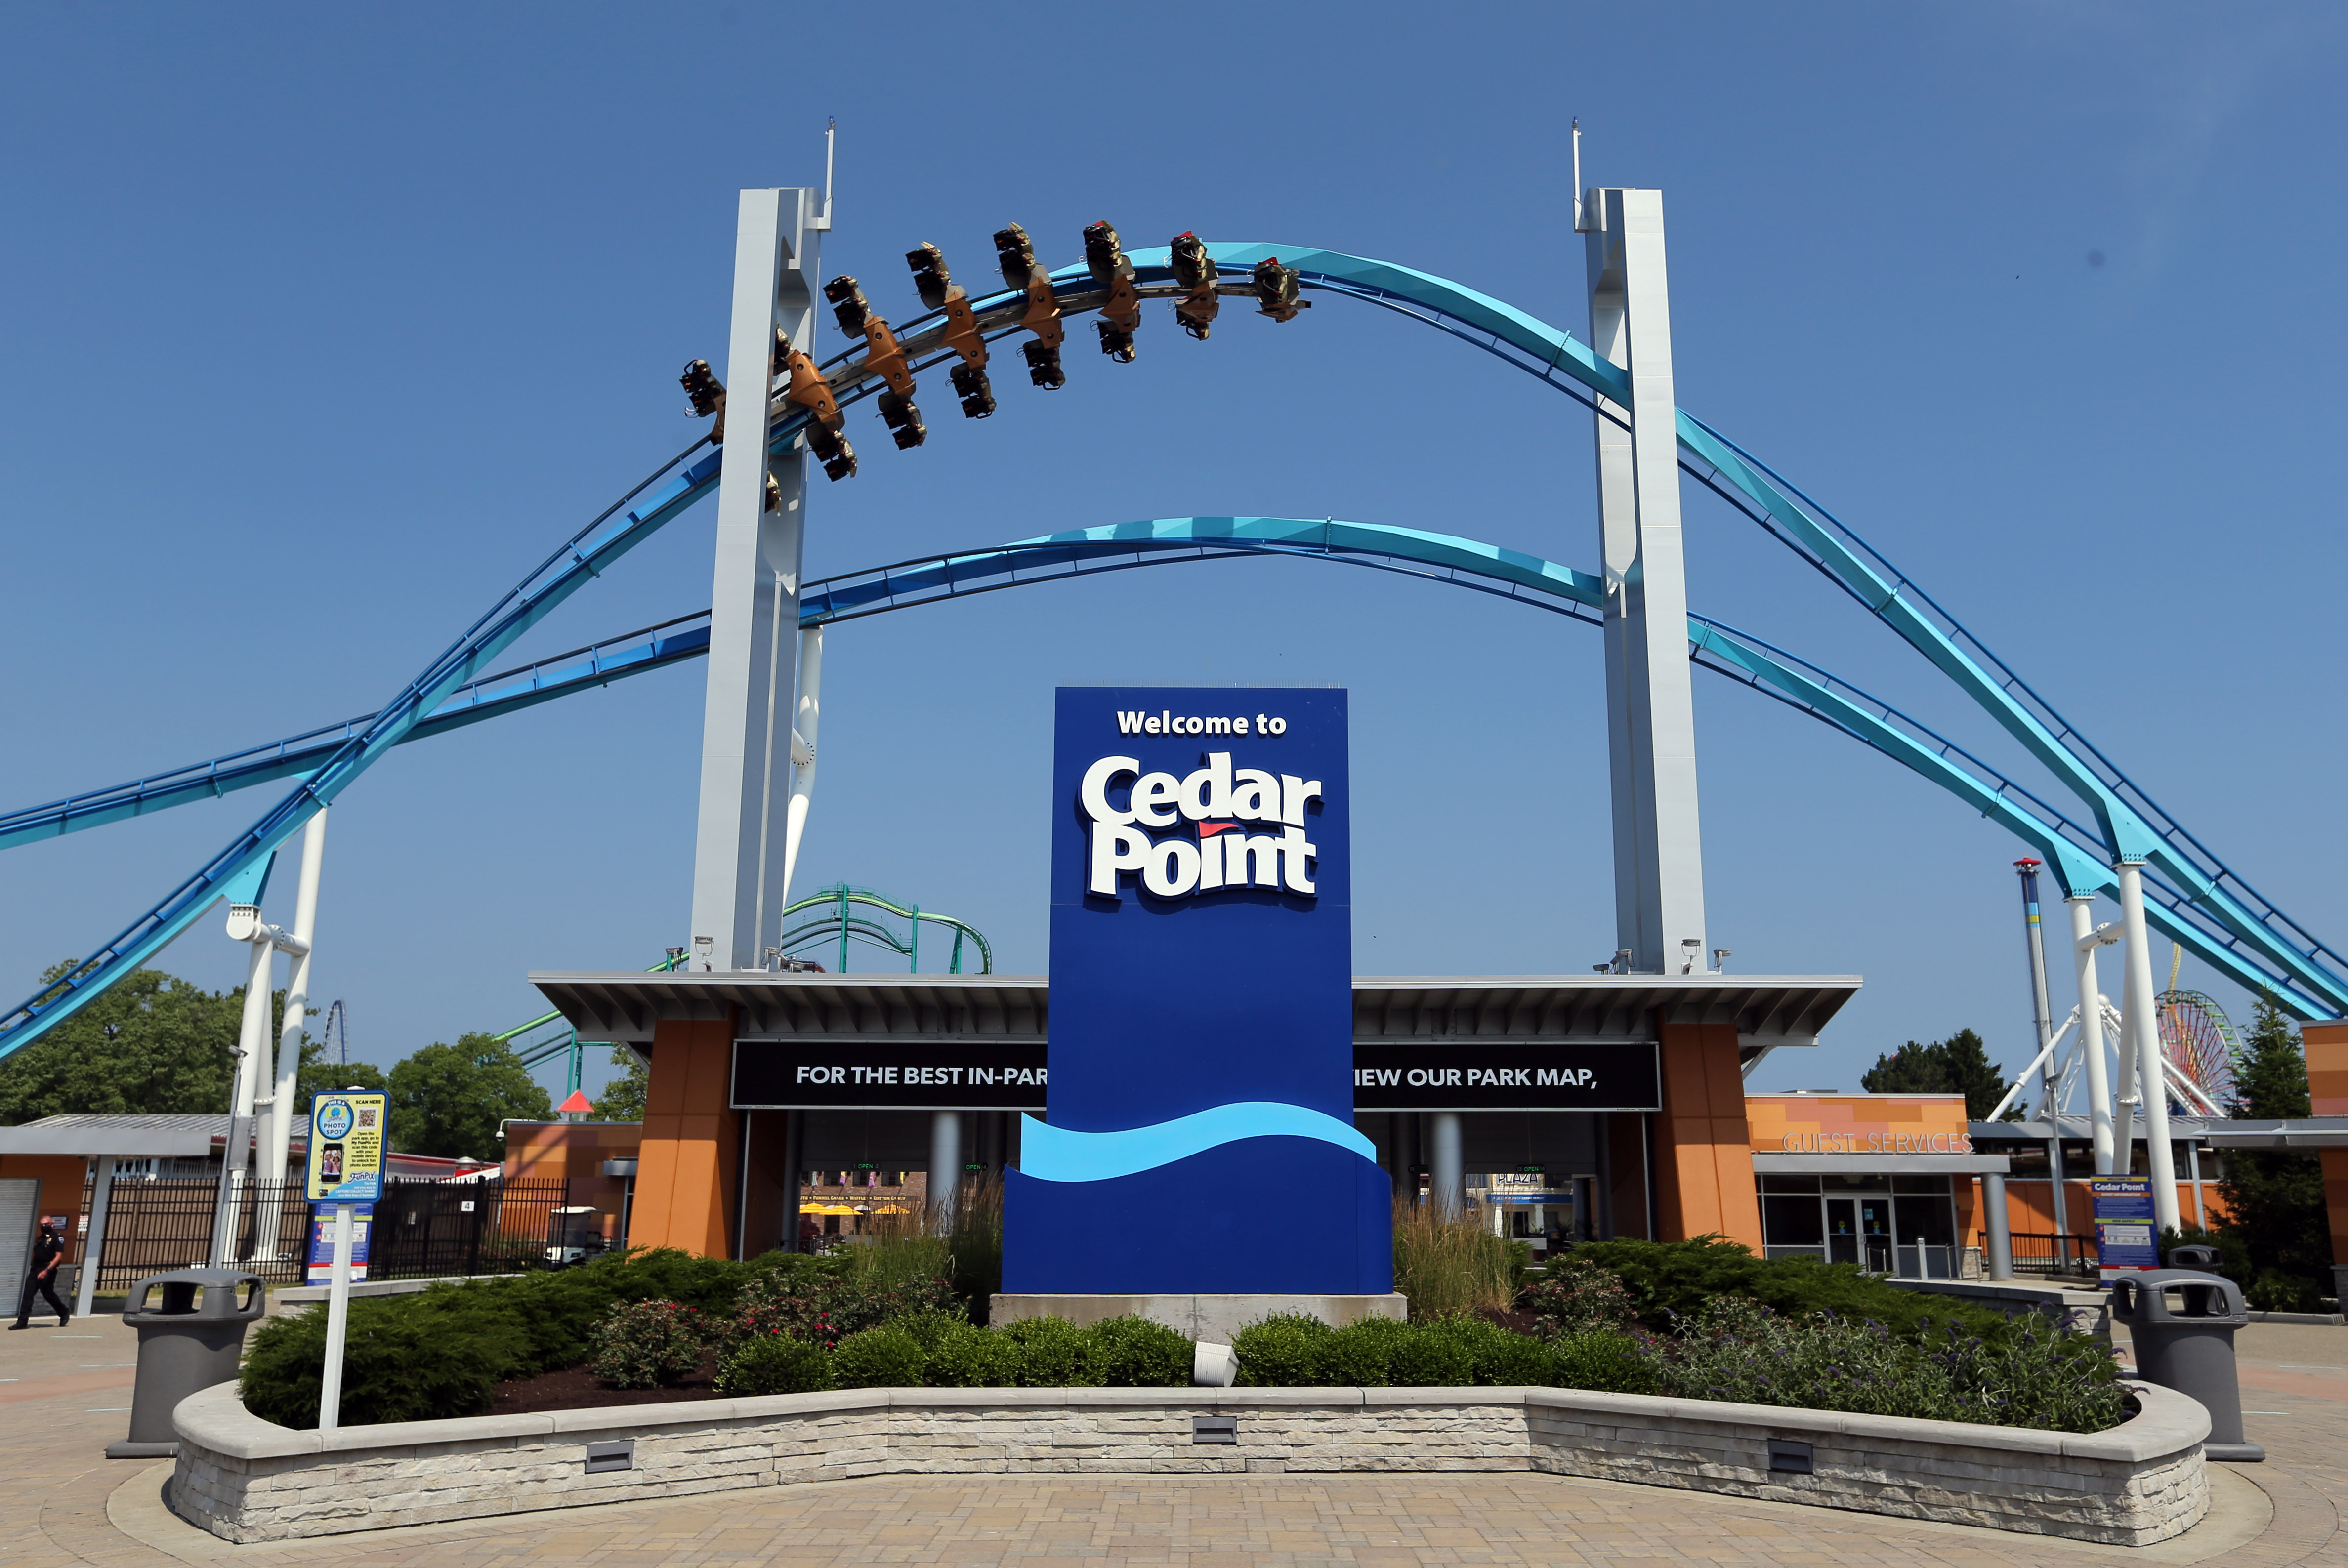 Cedar Point rolls back starting pay from 20 to 15 an hour for 2022